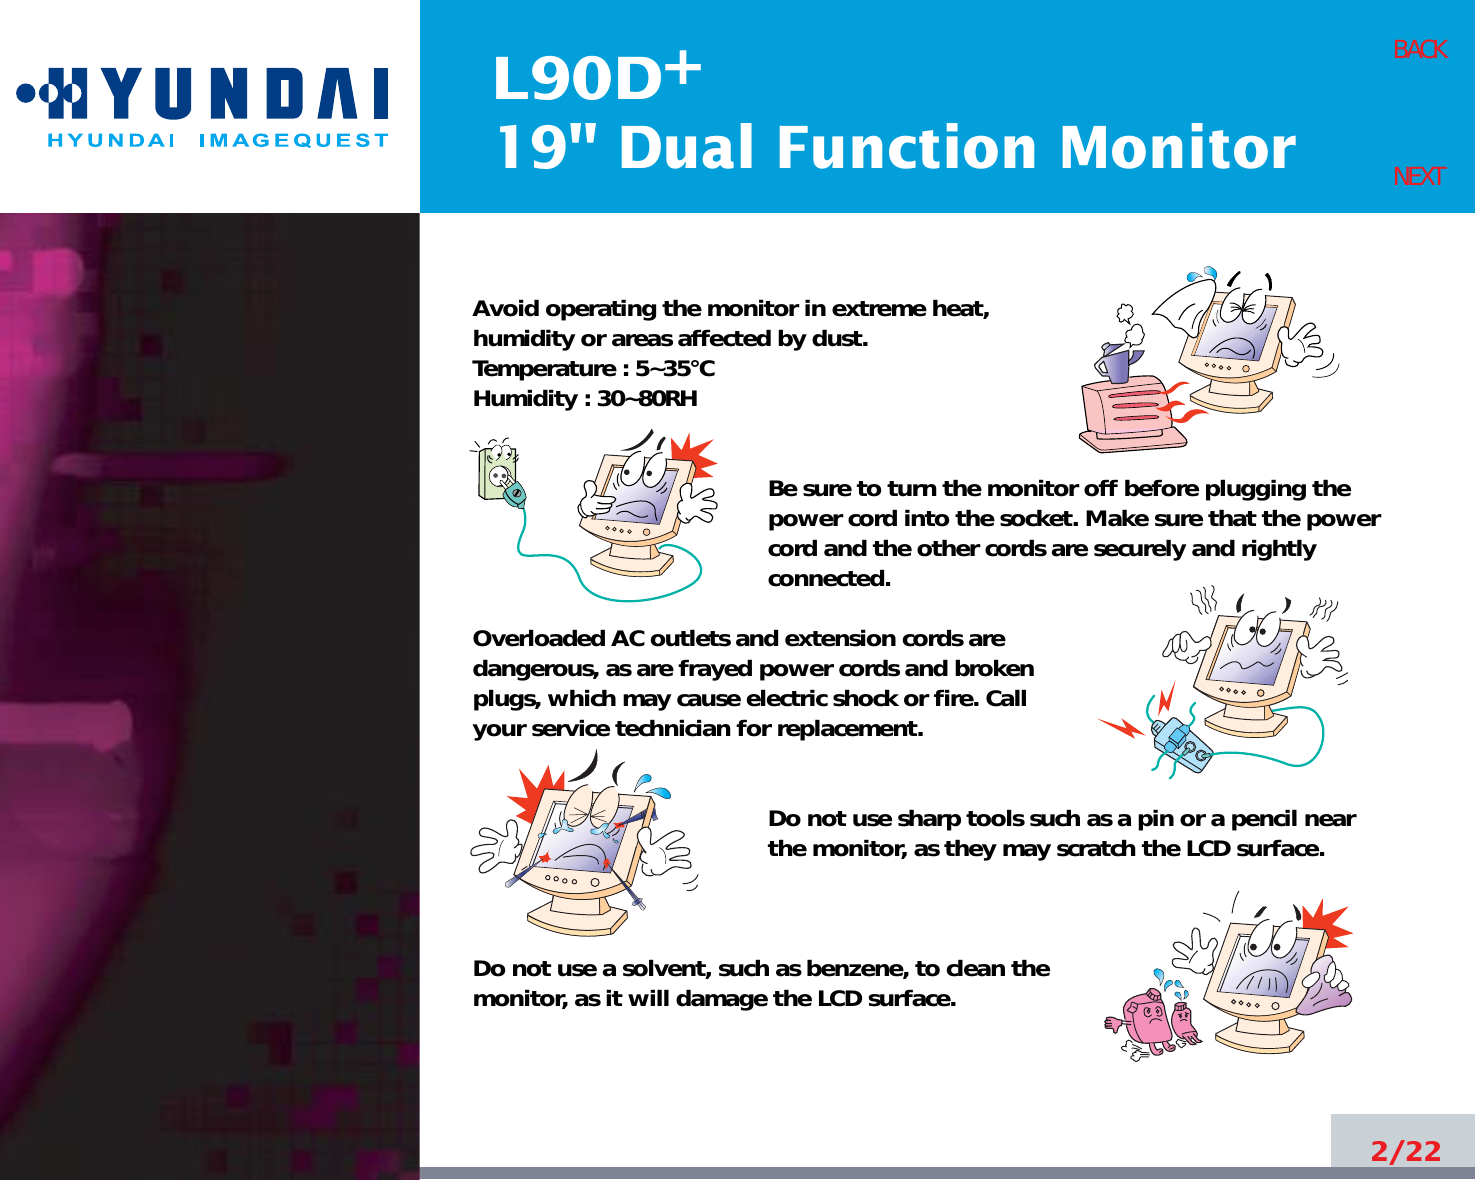 L90D19&quot; Dual Function Monitor+2/22BACKNEXTAvoid operating the monitor in extreme heat, humidity or areas affected by dust. Temperature : 5~35°CHumidity : 30~80RH Be sure to turn the monitor off before plugging thepower cord into the socket. Make sure that the powercord and the other cords are securely and rightlyconnected.Overloaded AC outlets and extension cords are dangerous, as are frayed power cords and broken plugs, which may cause electric shock or fire. Call your service technician for replacement.Do not use sharp tools such as a pin or a pencil near the monitor, as they may scratch the LCD surface.Do not use a solvent, such as benzene, to clean the monitor, as it will damage the LCD surface.